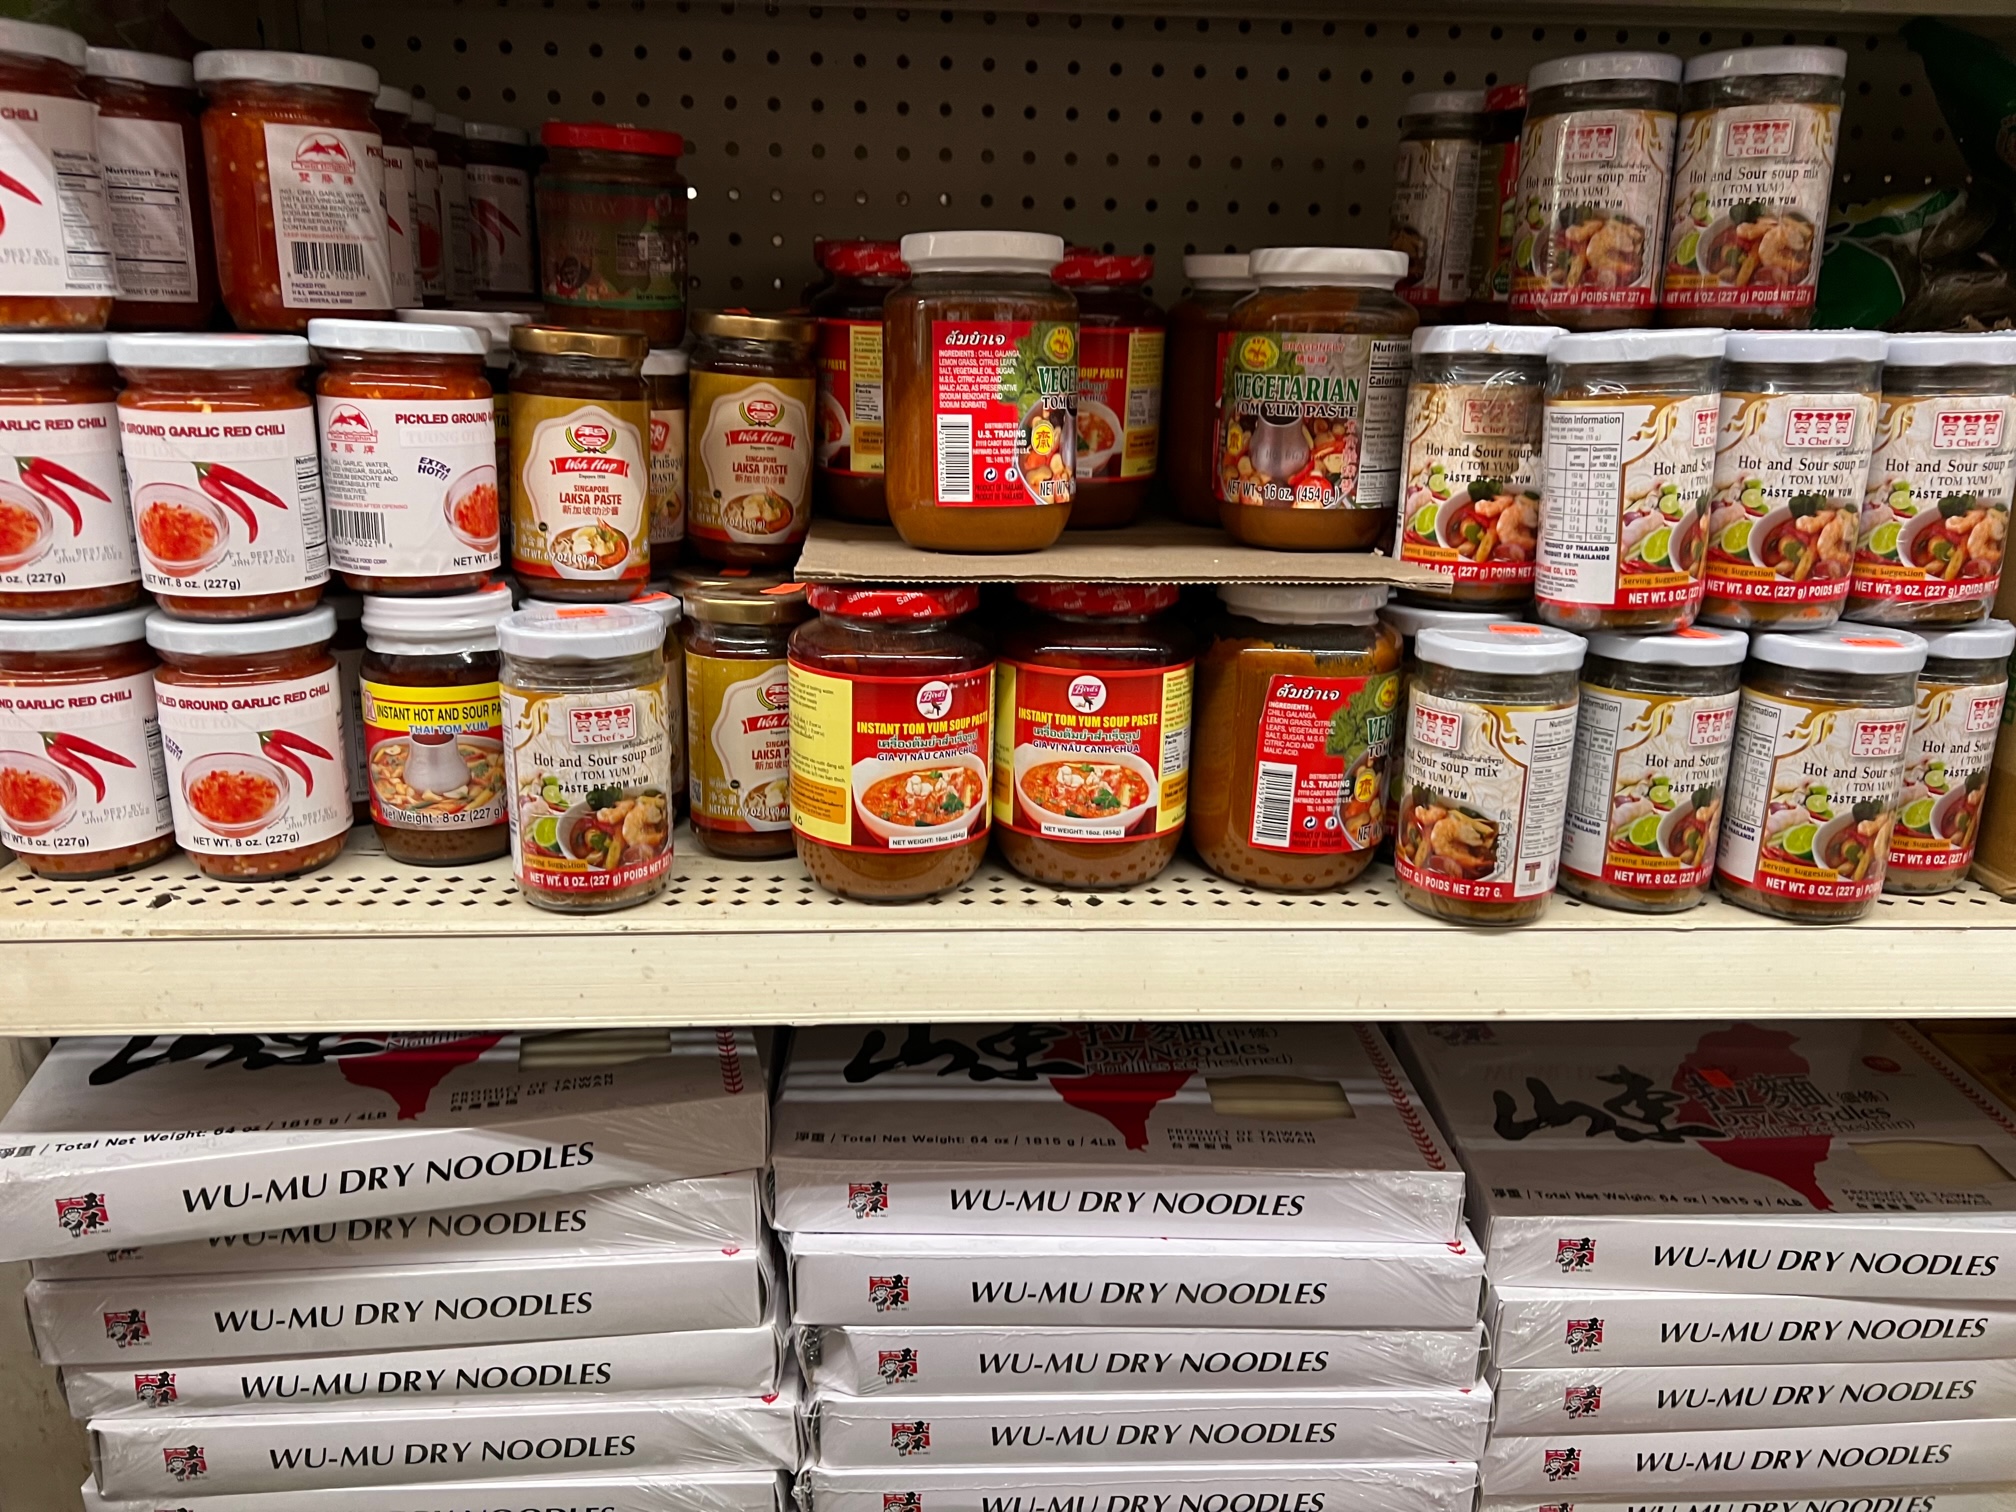 Two shelves at Far East Grocery show jars of sauces with peppers, and on the bottom, there are boxes of wu-mu dry noodles. Photo by Alyssa Buckley.